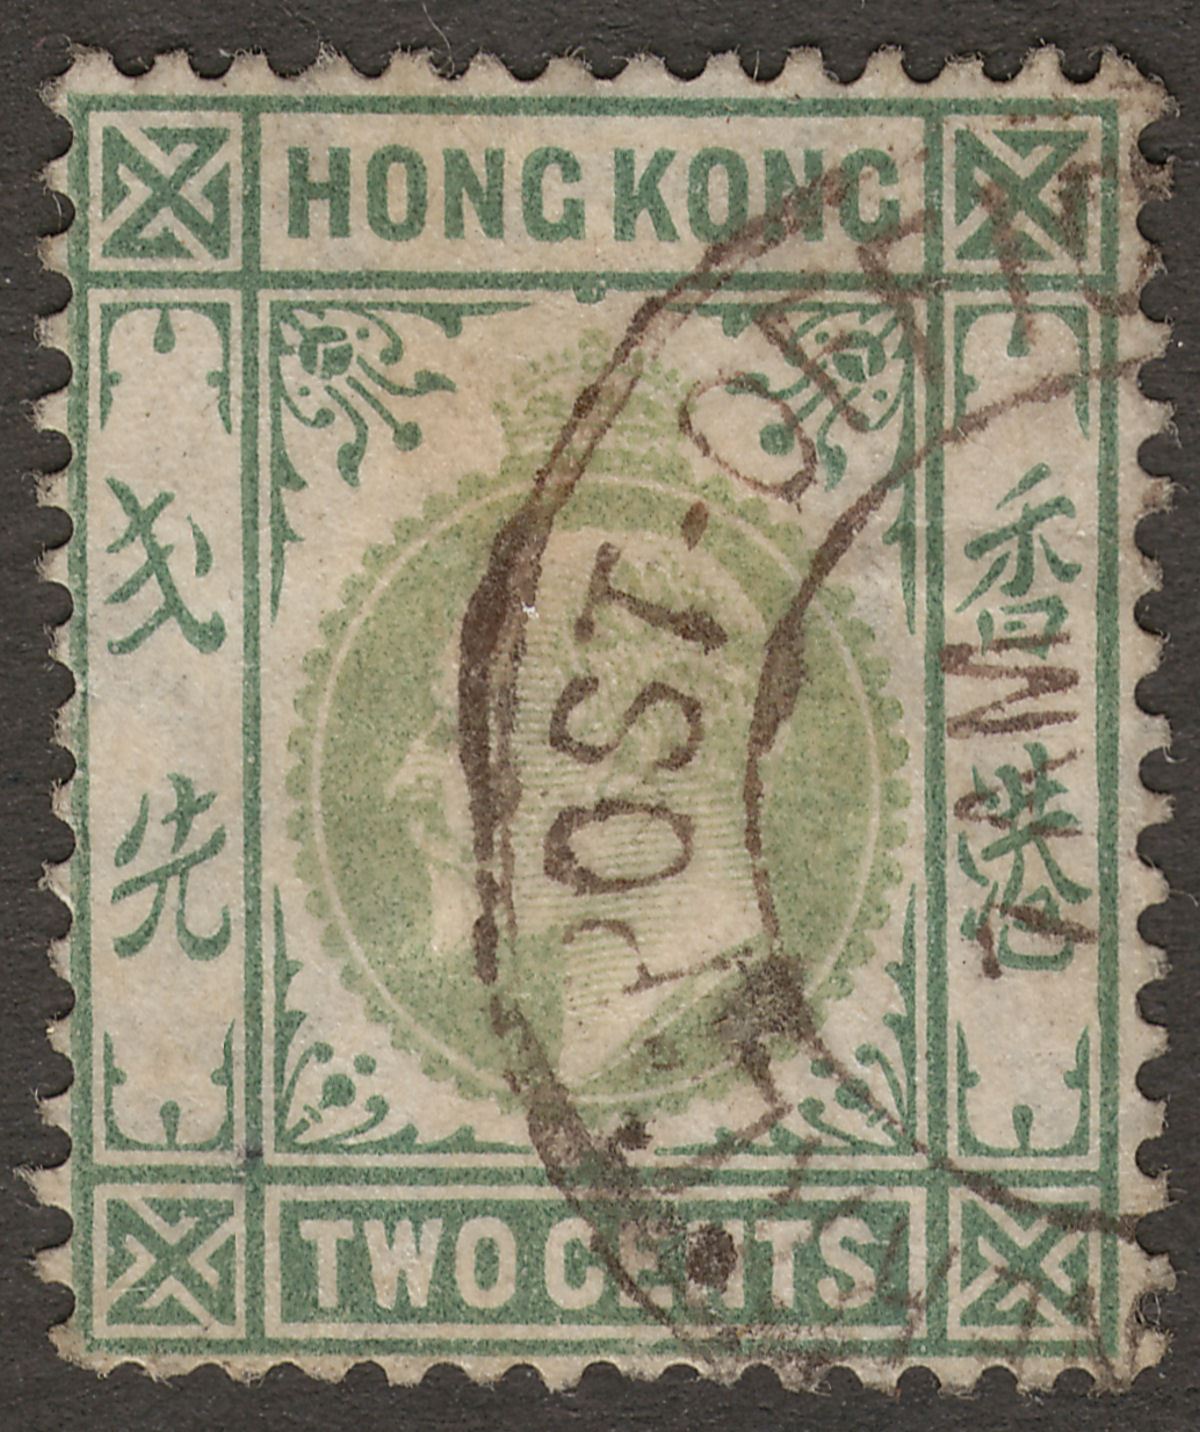 Hong Kong 1904 KEVII 2c Green Used w General Post Office Postmark stamp faulty